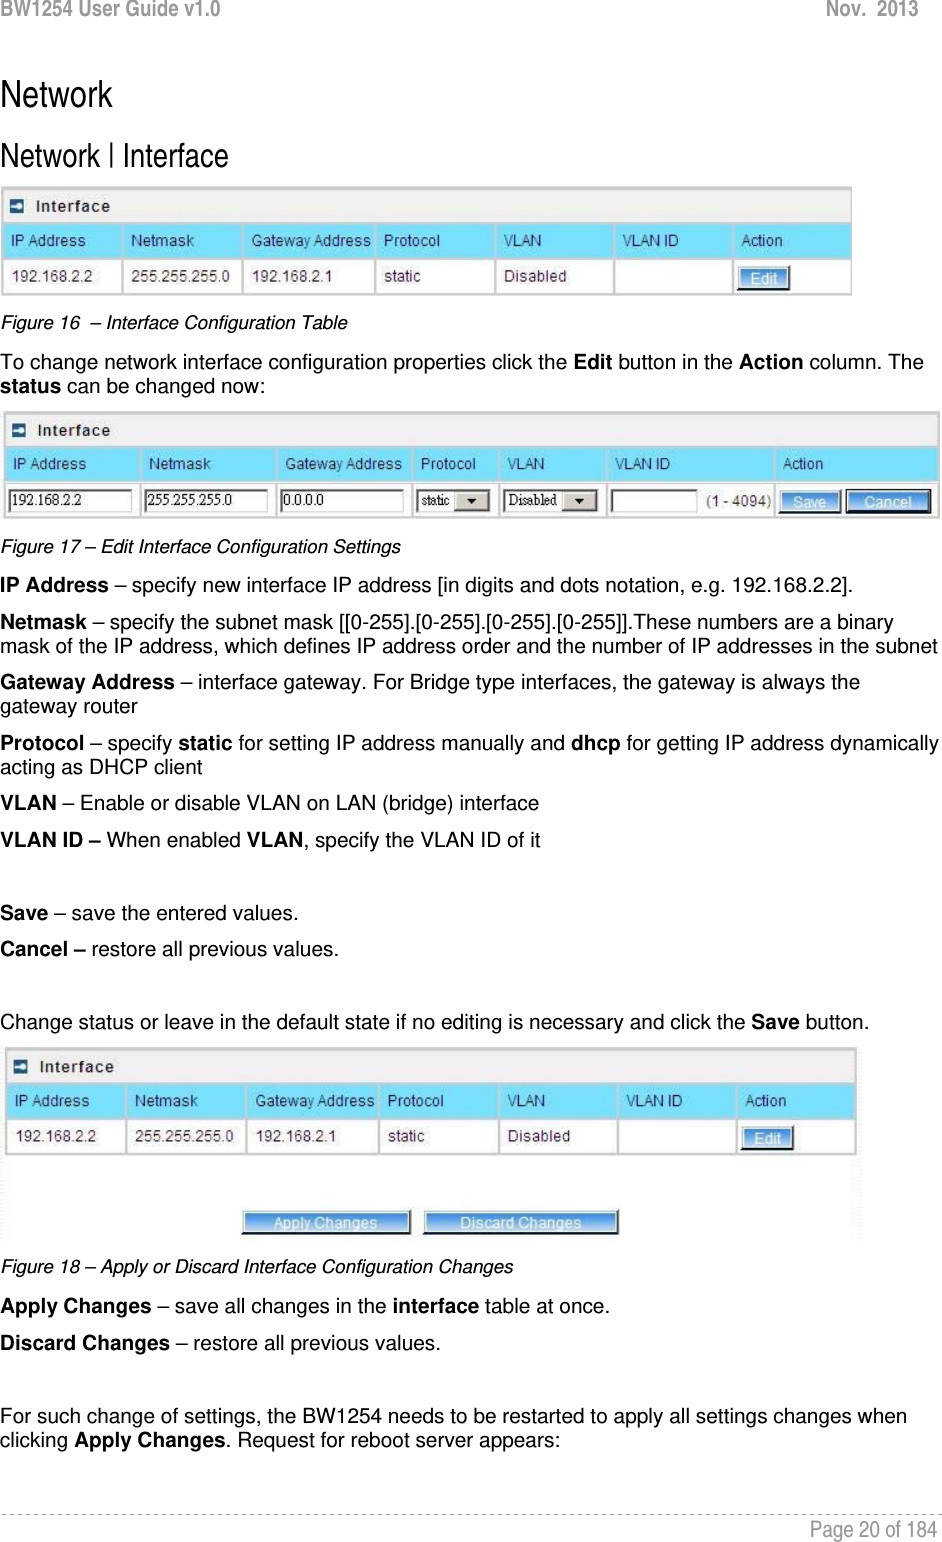 BW1254 User Guide v1.0  Nov.  2013     Page 20 of 184   Network Network | Interface   Figure 16  – Interface Configuration Table To change network interface configuration properties click the Edit button in the Action column. The status can be changed now:  Figure 17 – Edit Interface Configuration Settings IP Address – specify new interface IP address [in digits and dots notation, e.g. 192.168.2.2]. Netmask – specify the subnet mask [[0-255].[0-255].[0-255].[0-255]].These numbers are a binary mask of the IP address, which defines IP address order and the number of IP addresses in the subnet Gateway Address – interface gateway. For Bridge type interfaces, the gateway is always the gateway router Protocol – specify static for setting IP address manually and dhcp for getting IP address dynamically acting as DHCP client VLAN – Enable or disable VLAN on LAN (bridge) interface VLAN ID – When enabled VLAN, specify the VLAN ID of it  Save – save the entered values. Cancel – restore all previous values.  Change status or leave in the default state if no editing is necessary and click the Save button.   Figure 18 – Apply or Discard Interface Configuration Changes Apply Changes – save all changes in the interface table at once. Discard Changes – restore all previous values.  For such change of settings, the BW1254 needs to be restarted to apply all settings changes when clicking Apply Changes. Request for reboot server appears: 